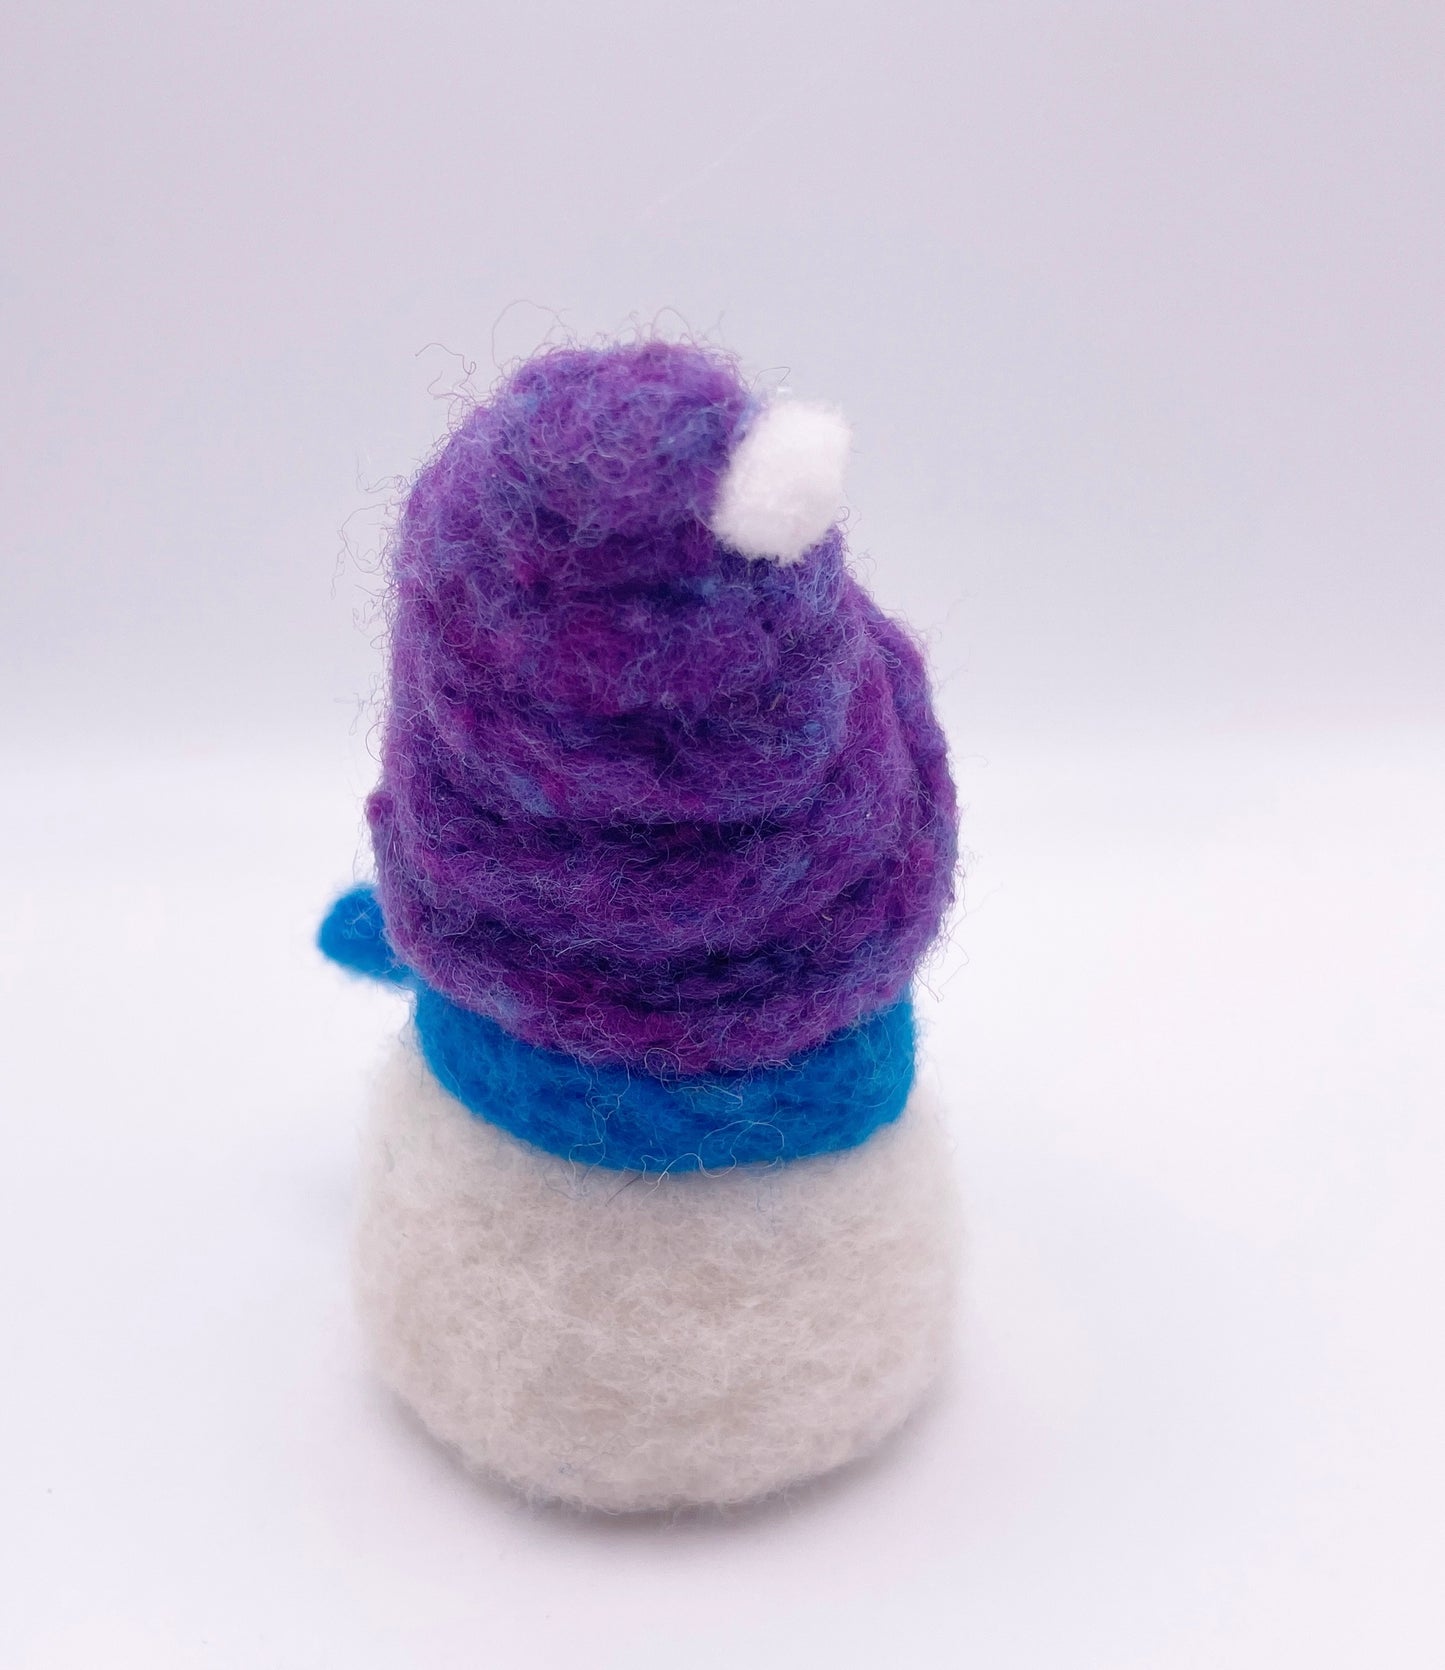 4.5 inch Snowman Needle Felted Figure